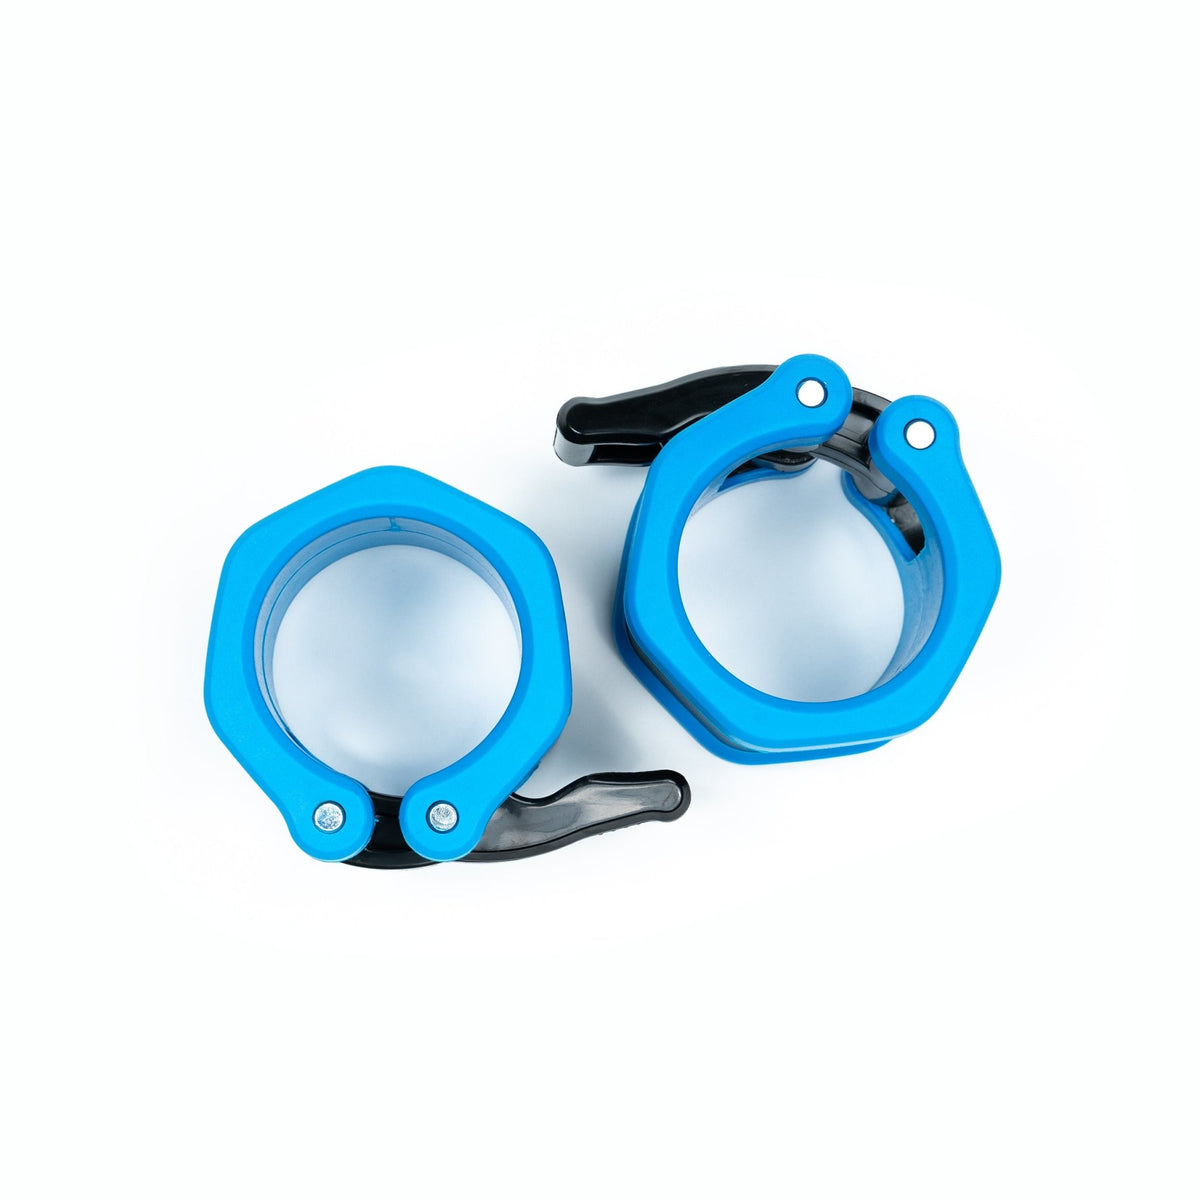 FitWay Equip. Olympic Locking Collars - Fitness Experience